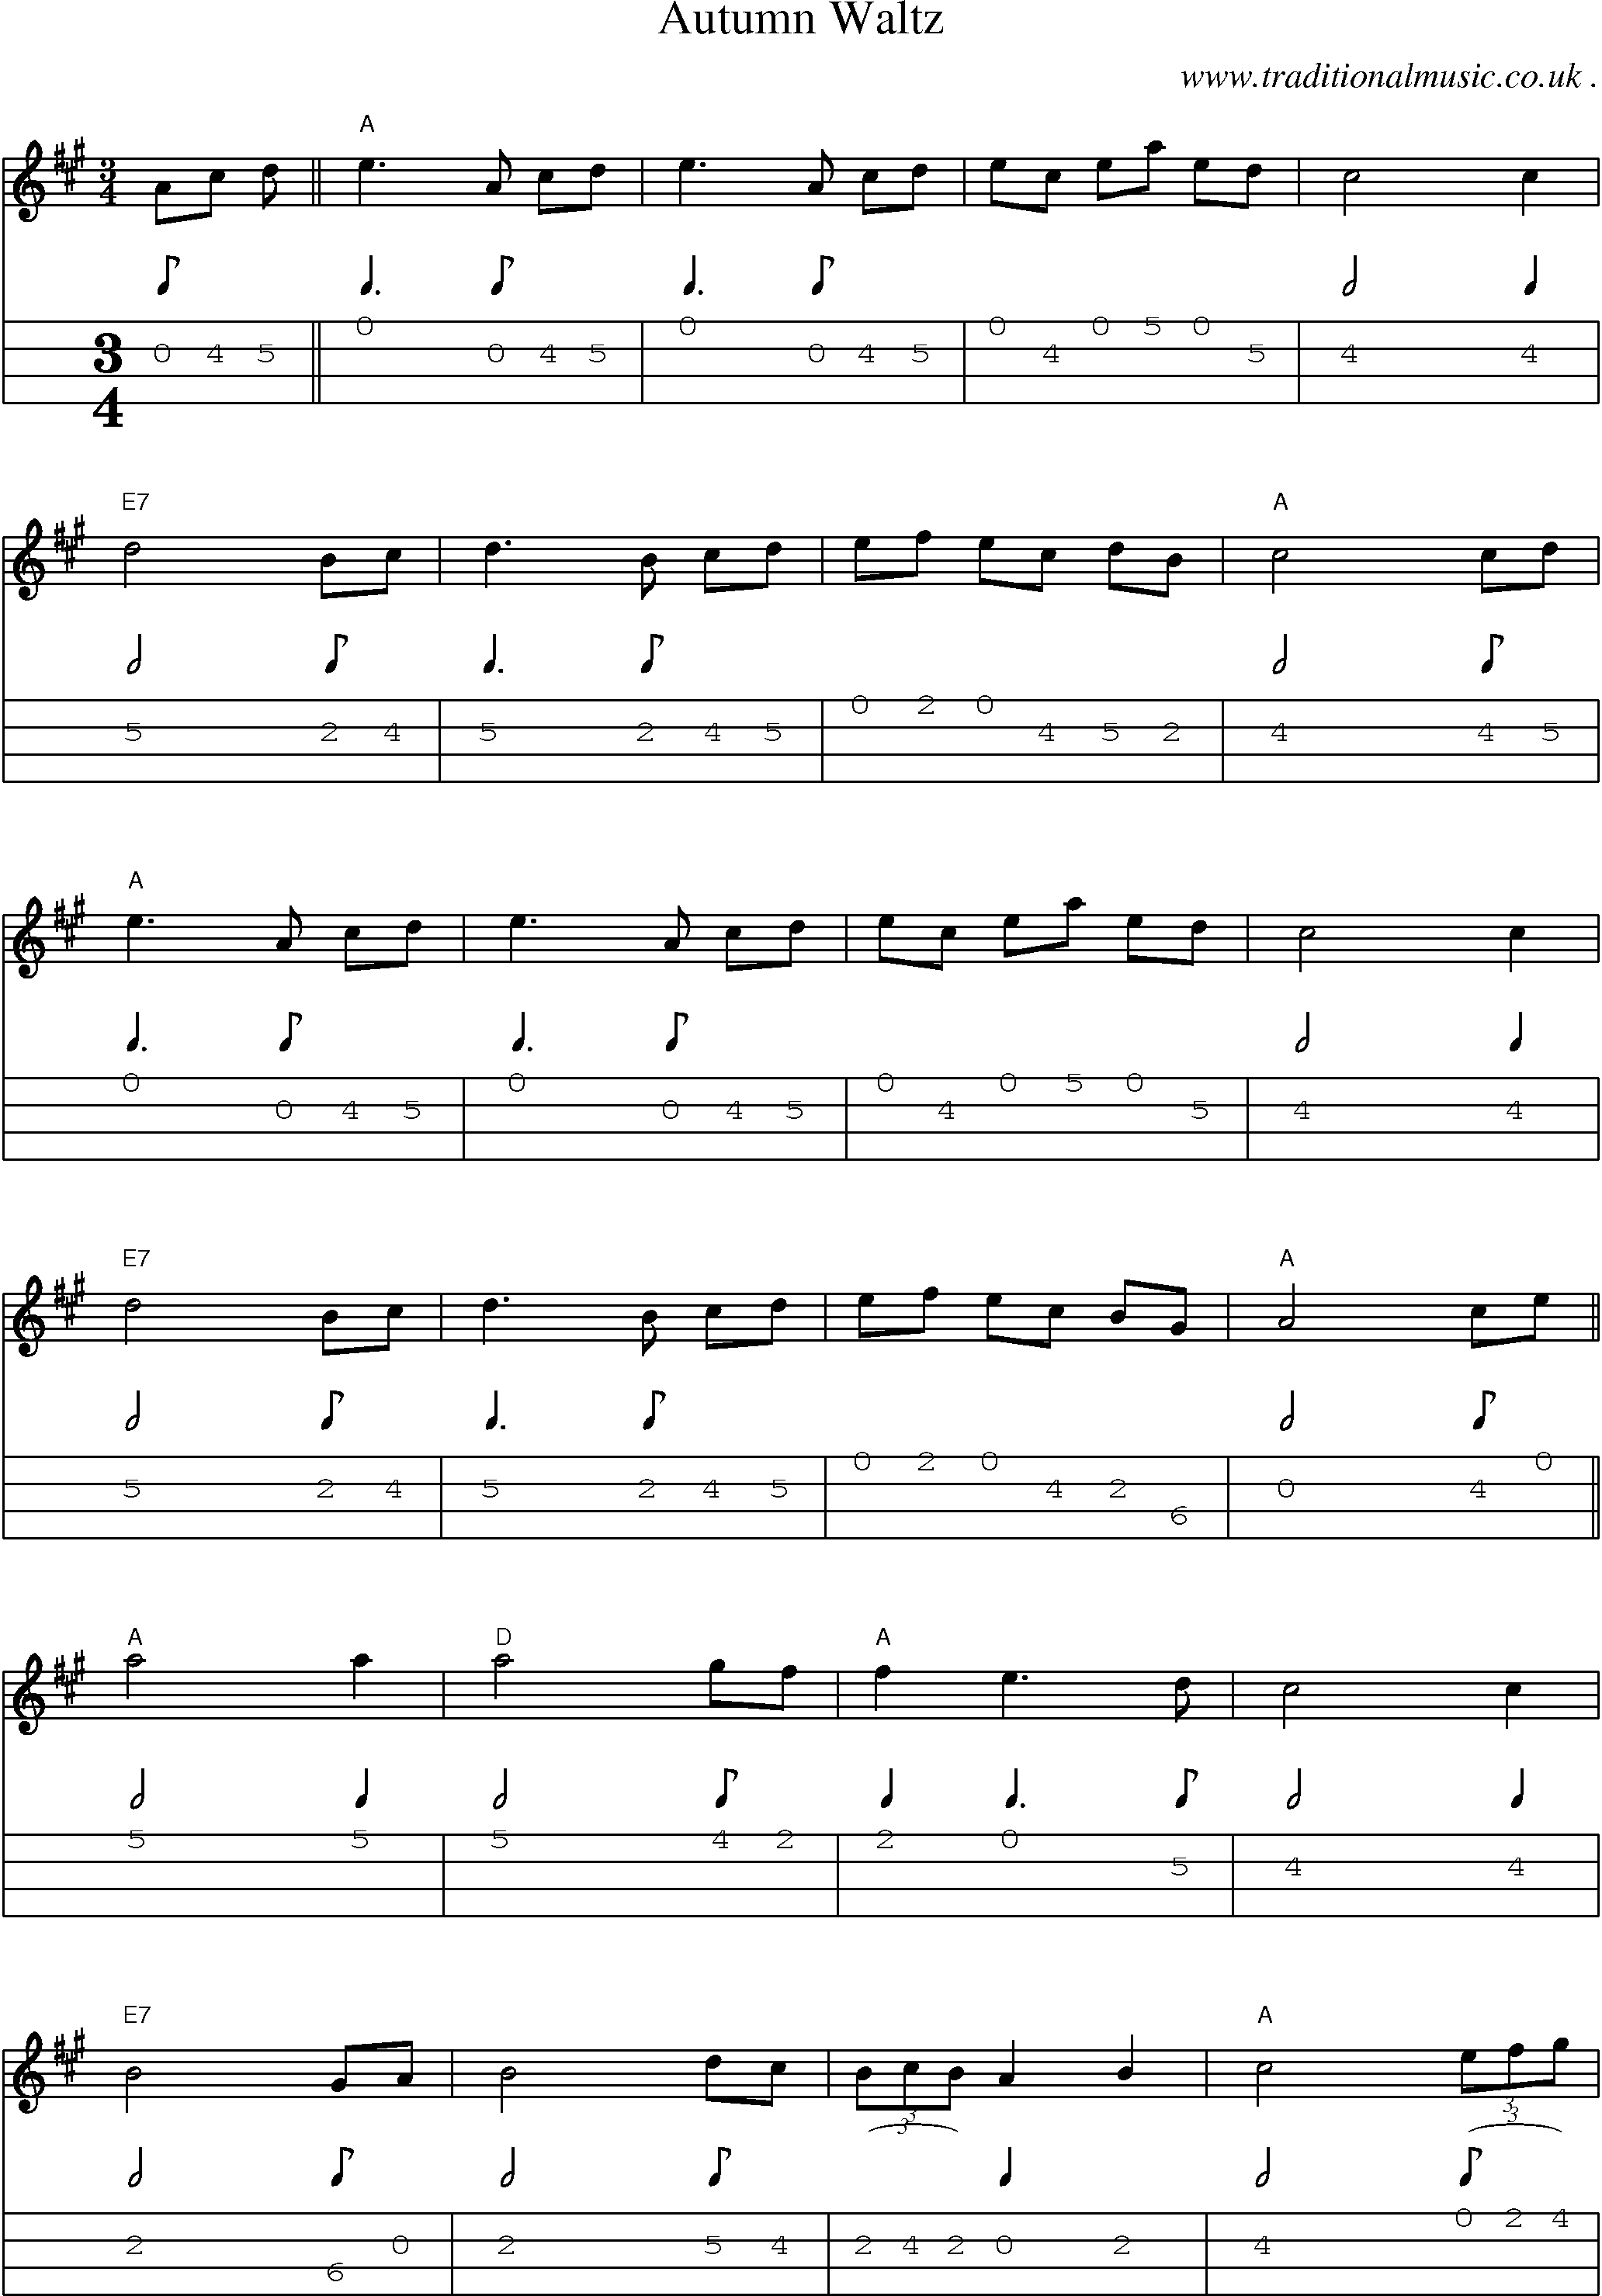 Music Score and Guitar Tabs for Autumn Waltz